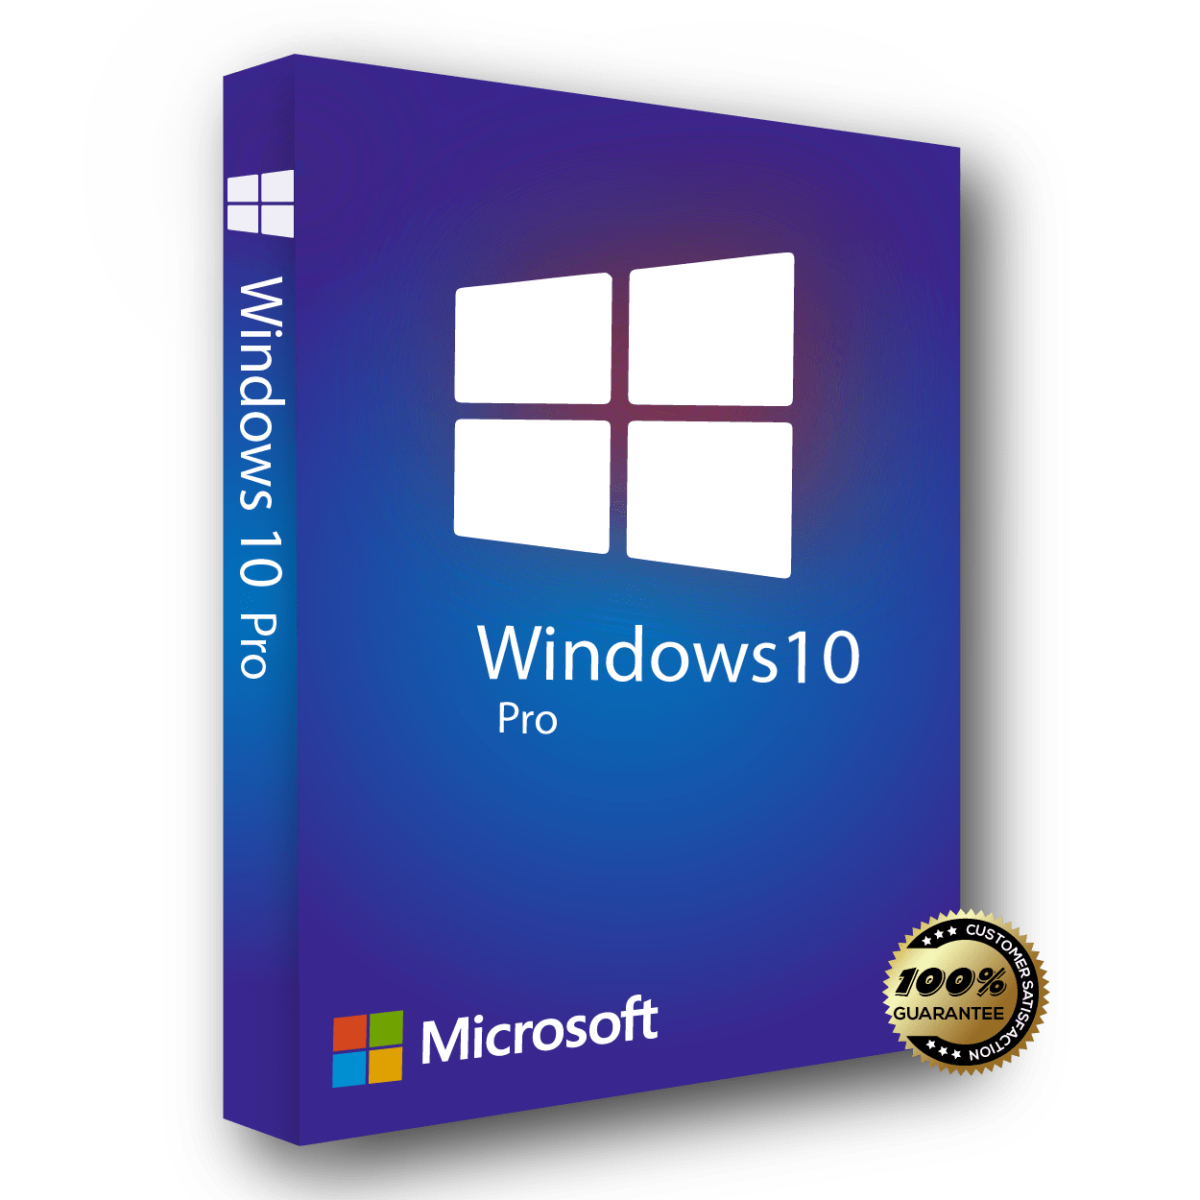 Buy Windows 10 Professional you will receive a 100% Original Microsoft license that can be activated directly on the official Microsoft website